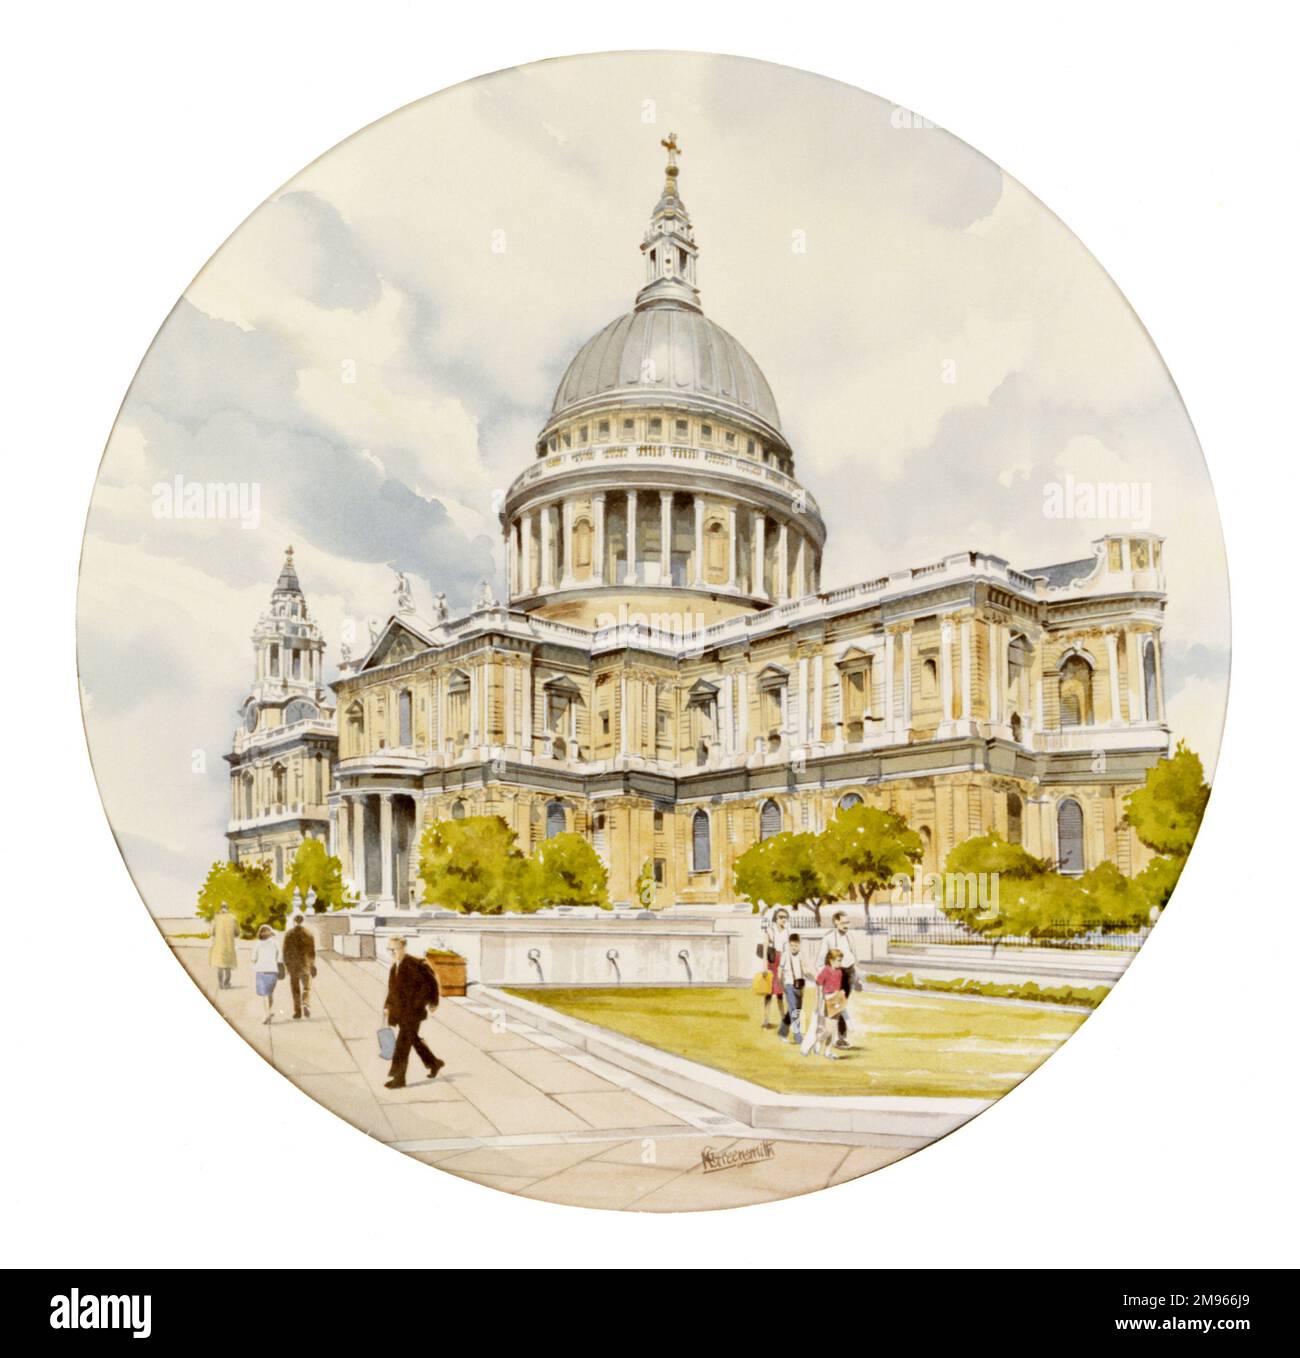 A painting by Malcolm Greensmith of St Paul's Cathedral. This fine example of post-medieval architecture, built following the destruction of the medieval church in the Great Fire of 1666, was designed by Sir Christopher Wren. Stock Photo